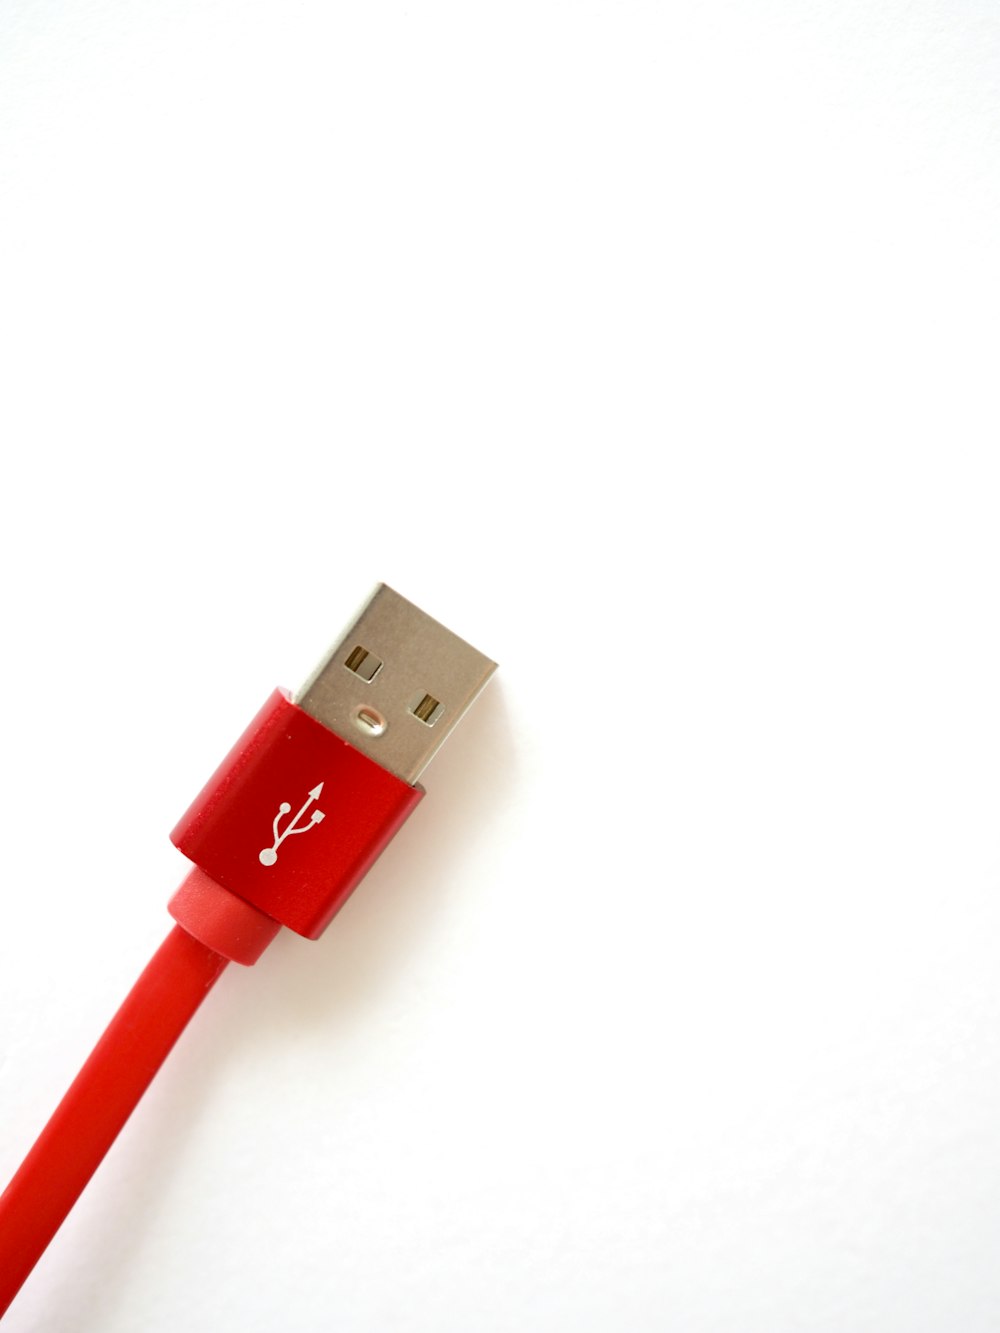 red usb cable on white surface